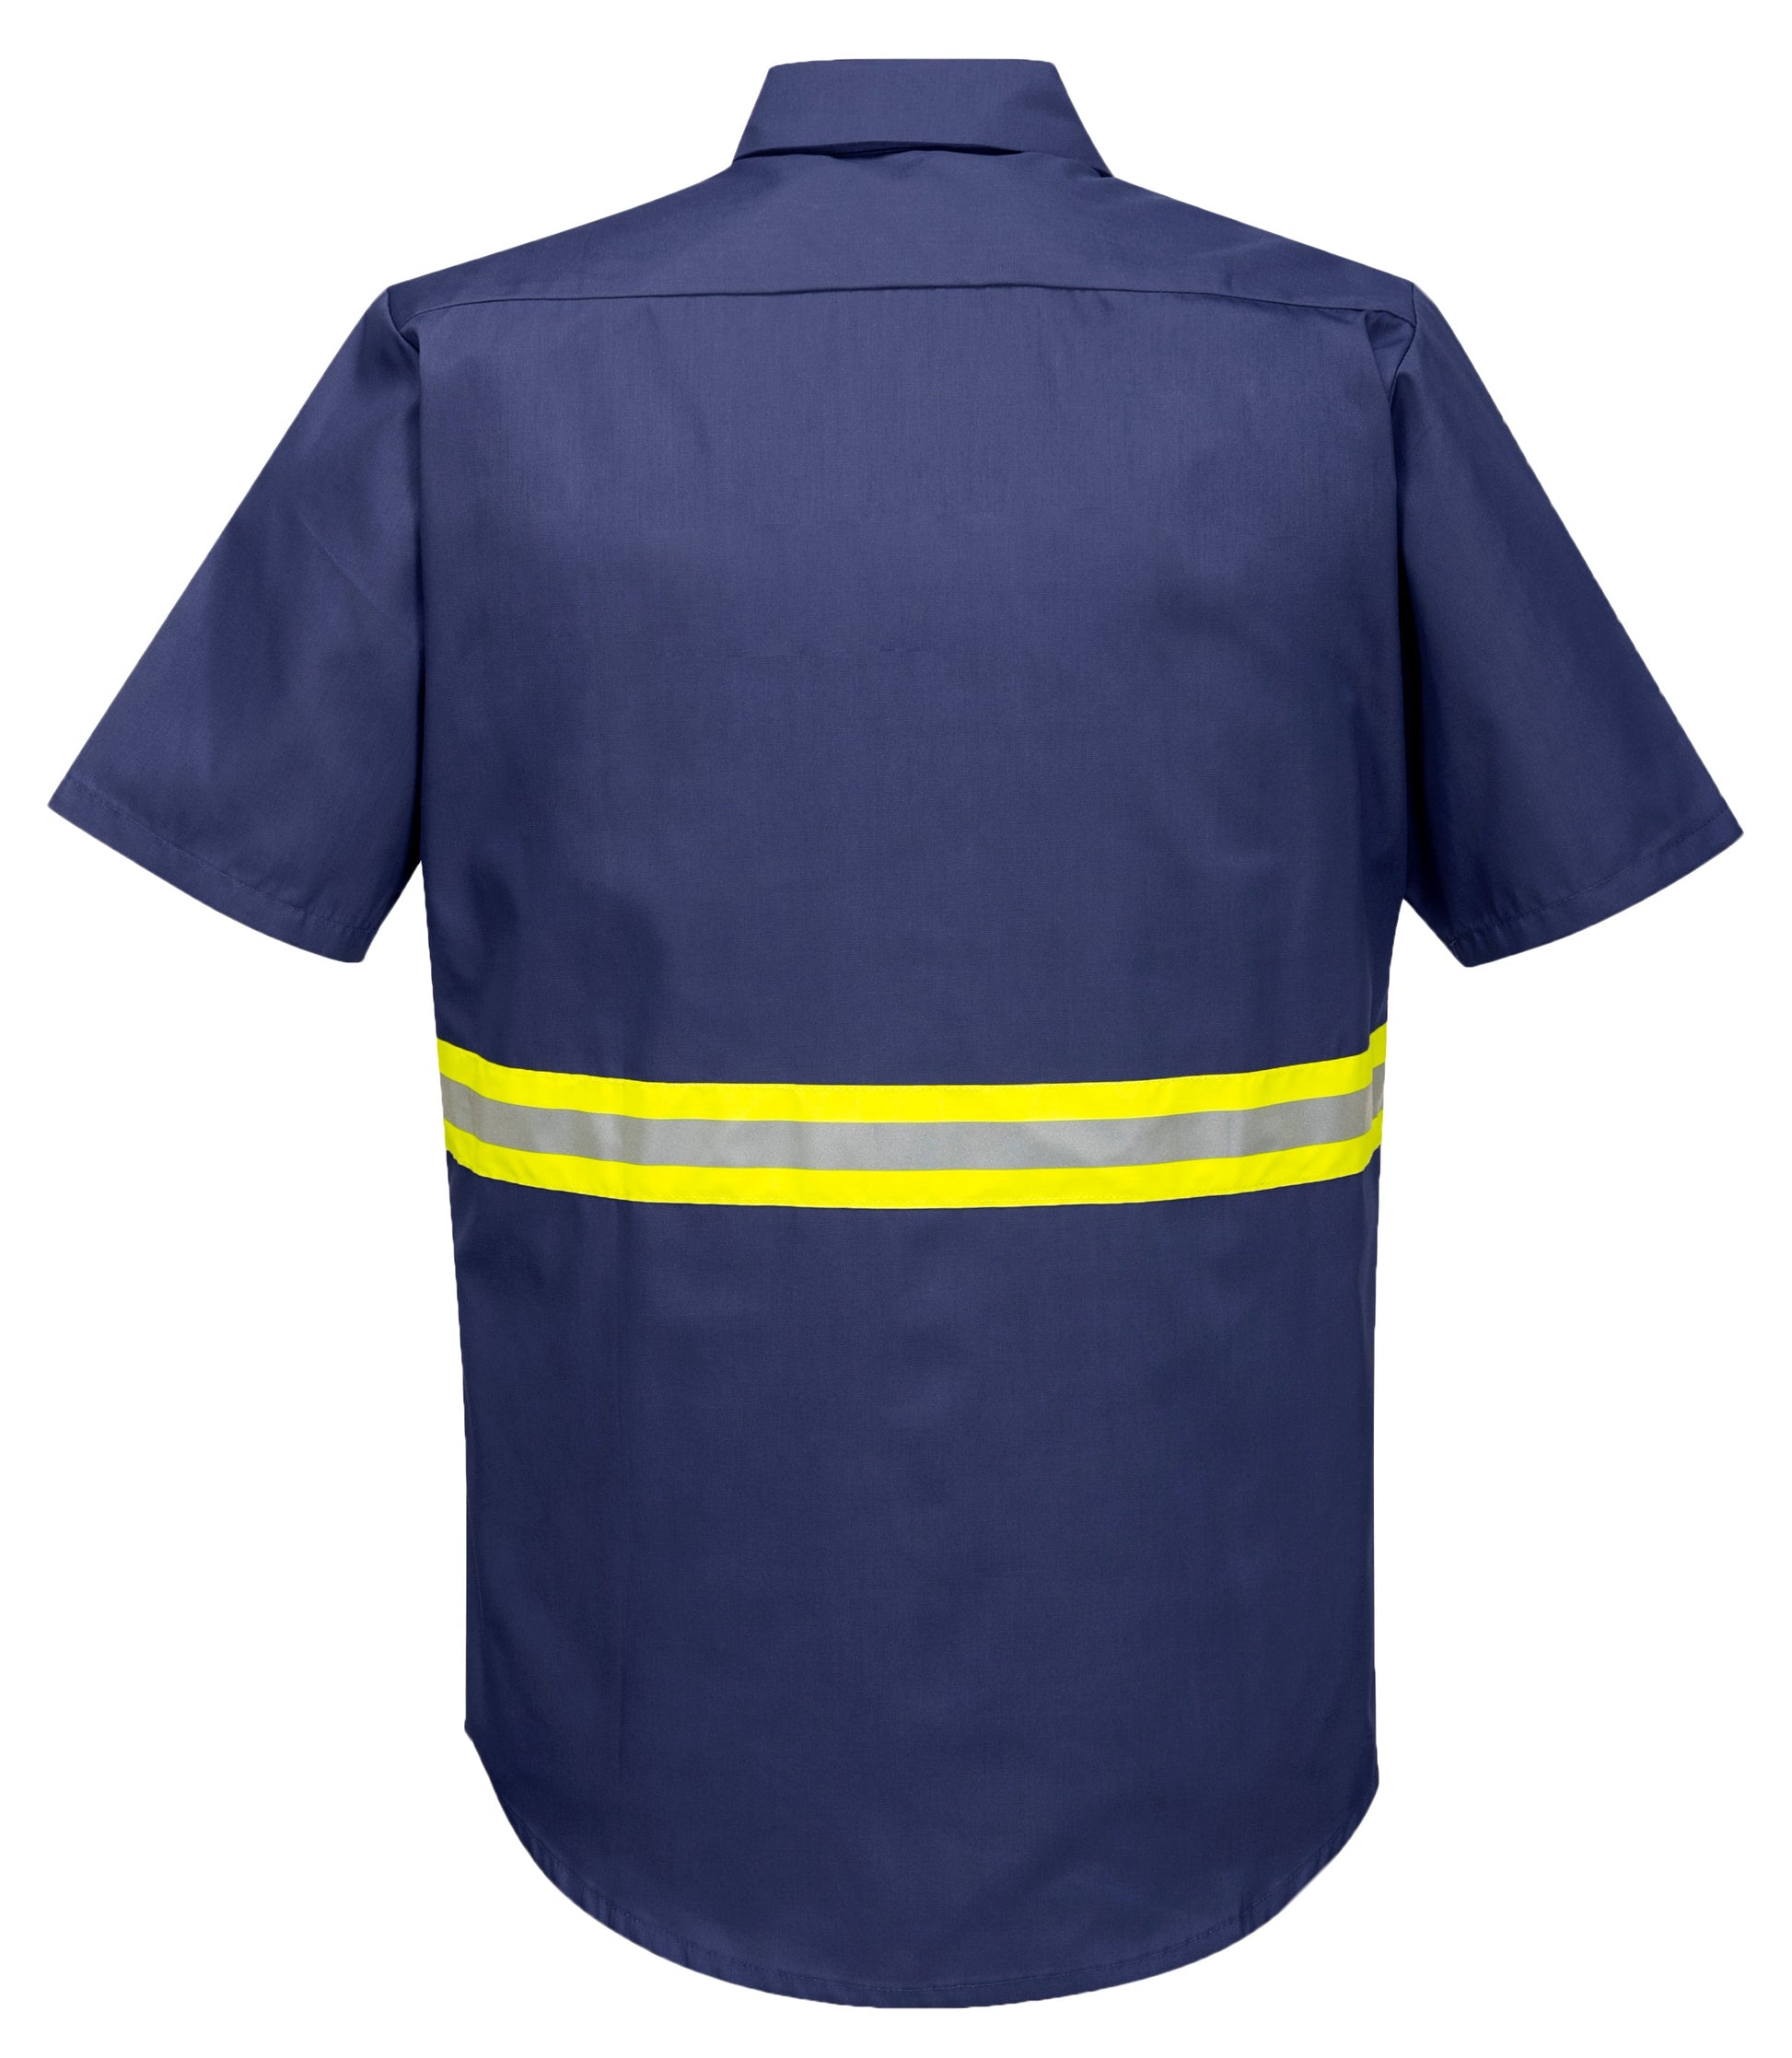 Portwest Iona Work Shirt S/S F124 - New England Safety Supply